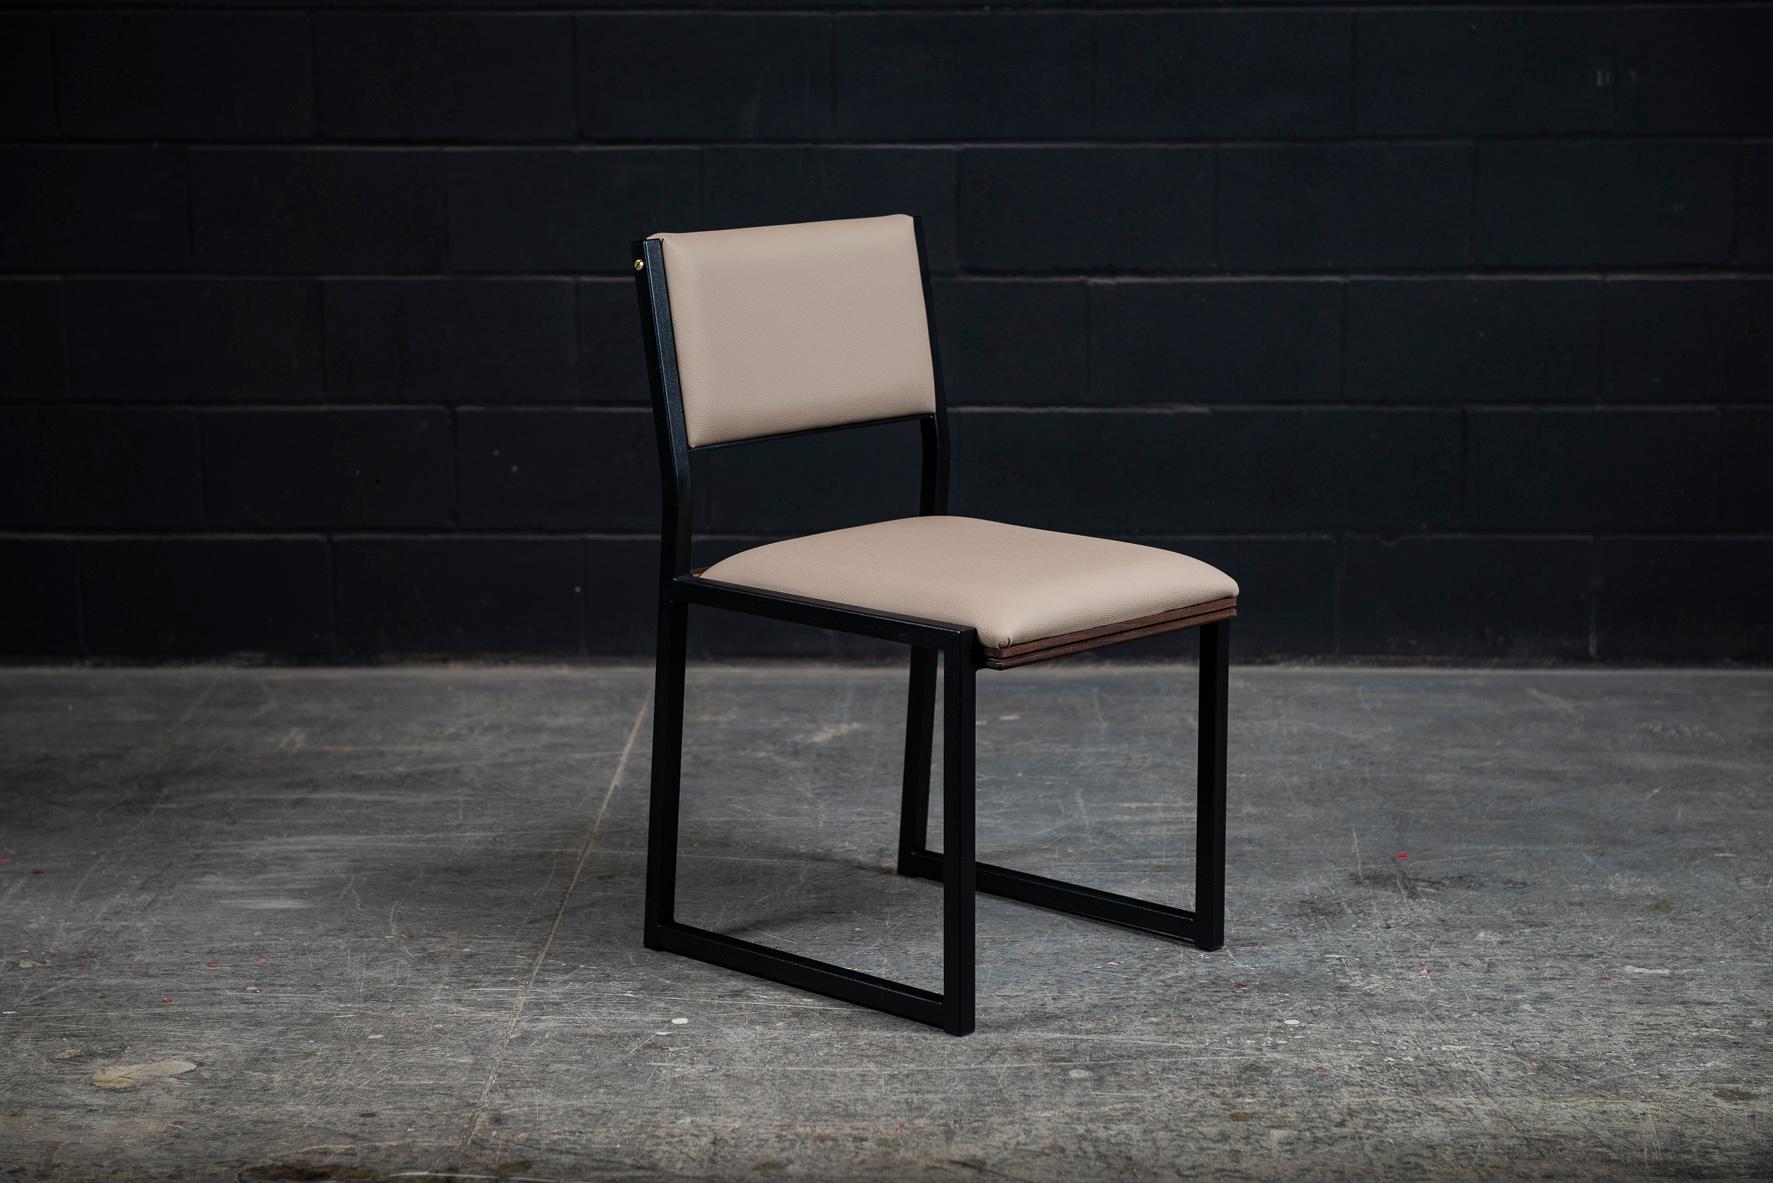 The Shaker modern dining chair is handmade to order from our unique Ambrozia black textured steel tubing frame. Available in a large variety of premium vinyls colors or leather in options. Also offered in COM or COL. Featuring subtitle solid wood